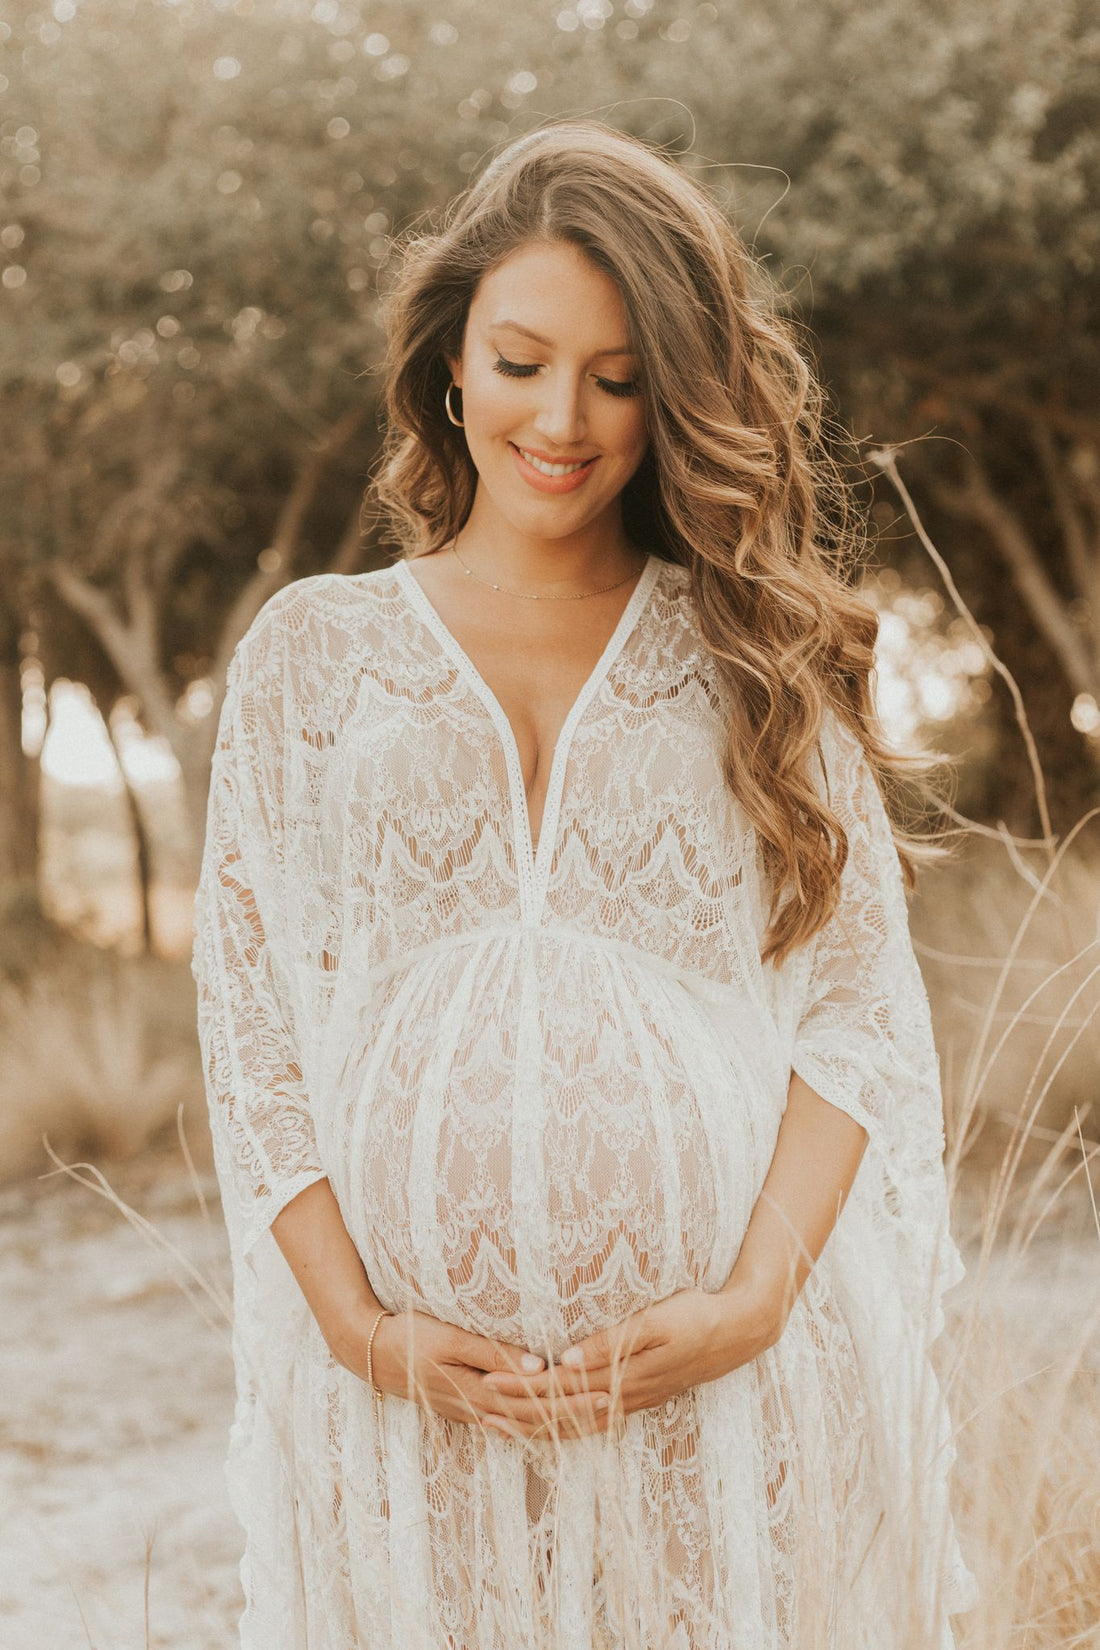 Should you rent a dress for your maternity photoshoot?